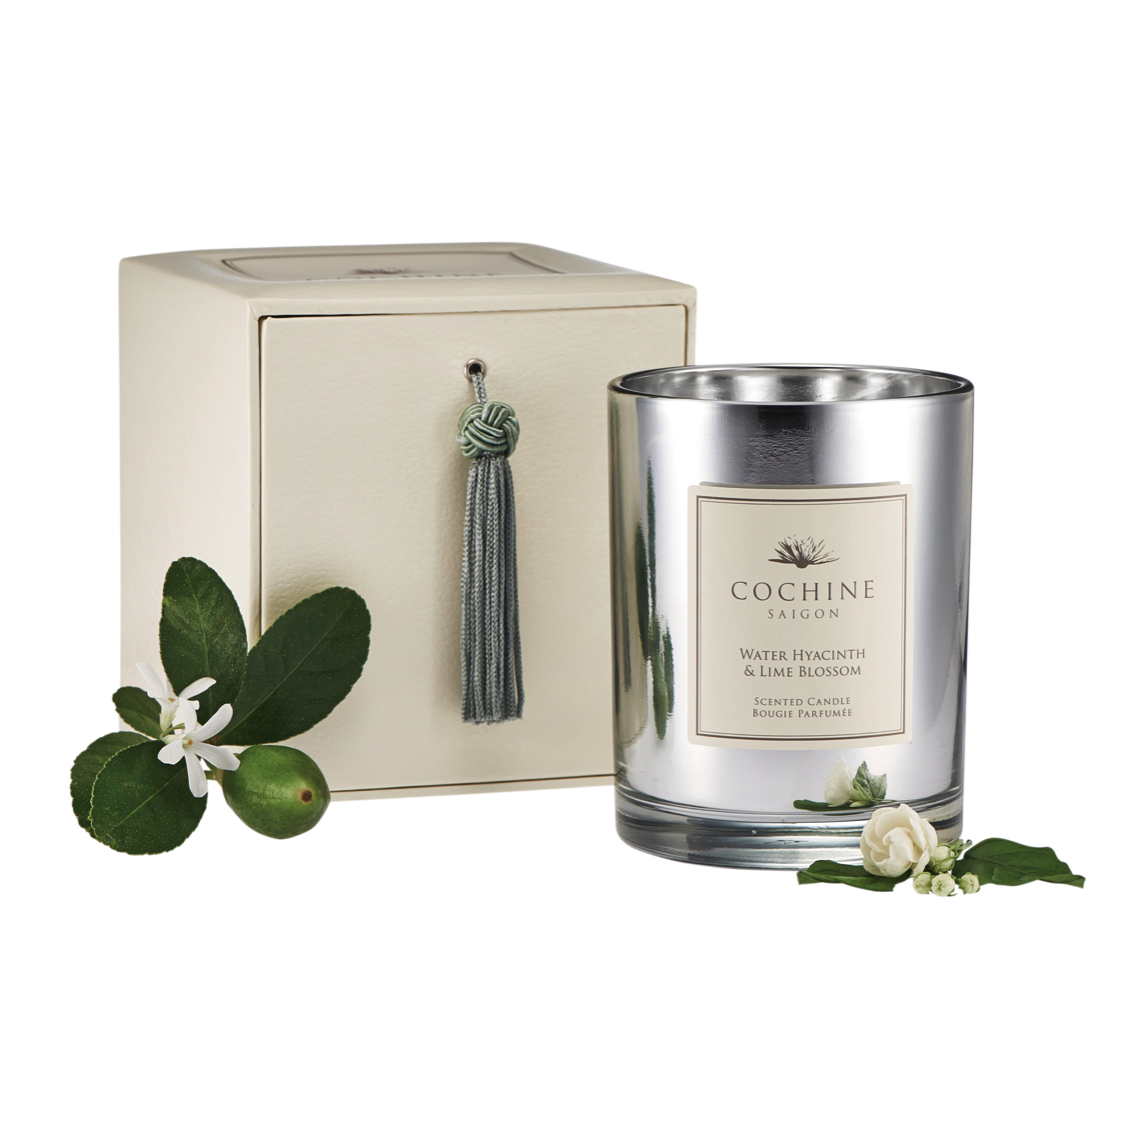 Cochine luxury candles and Cochine reed diffusers for the most luxury home fragrances by Cochine Saigon